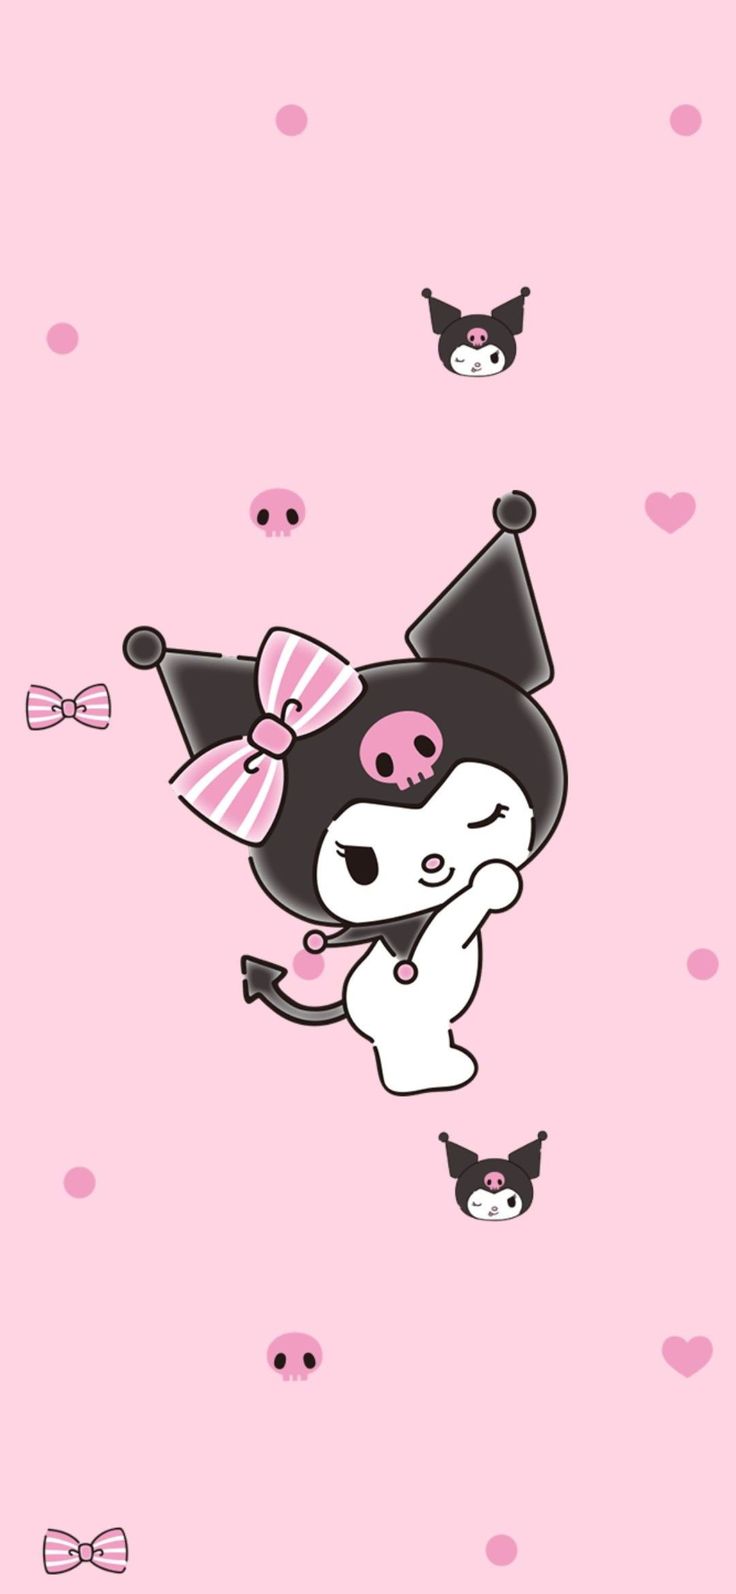 A cute cat with pink bow and black hat on the wall - Kuromi